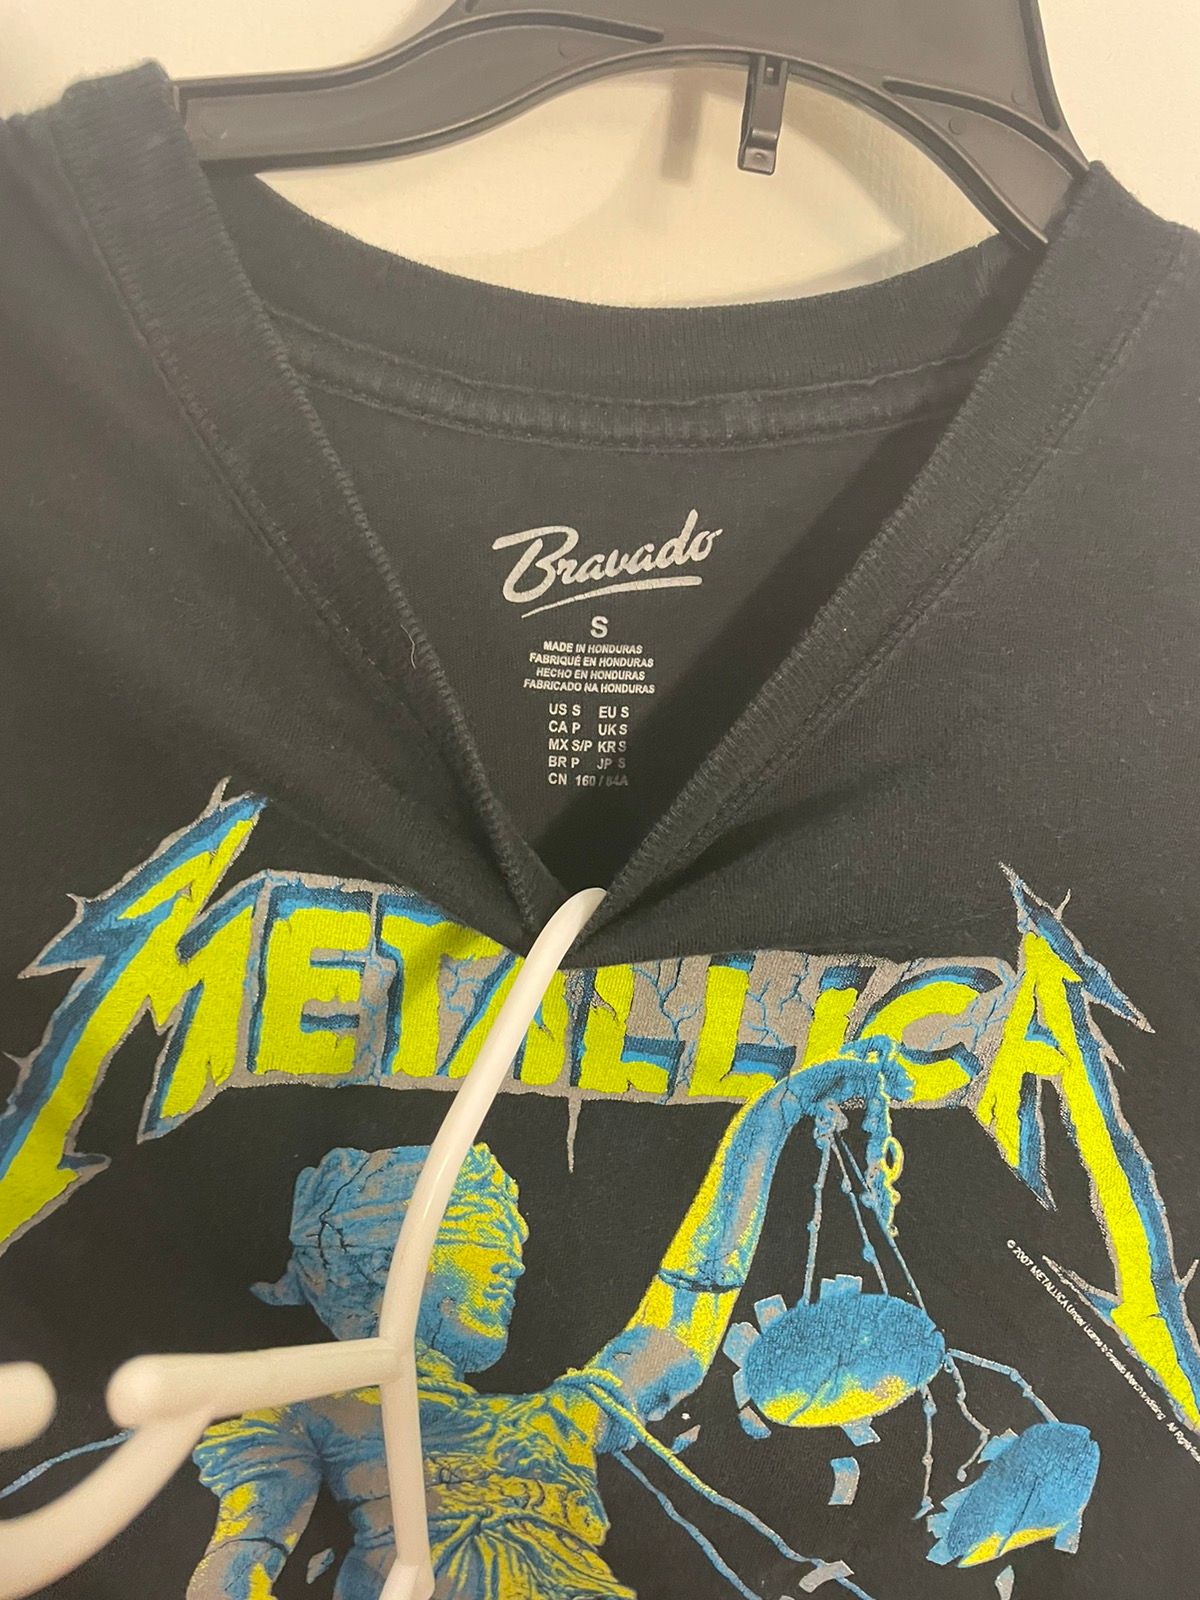 Vintage Men’s Small Black Metallica Graphic Band Tee Size US S / EU 44-46 / 1 - 3 Preview